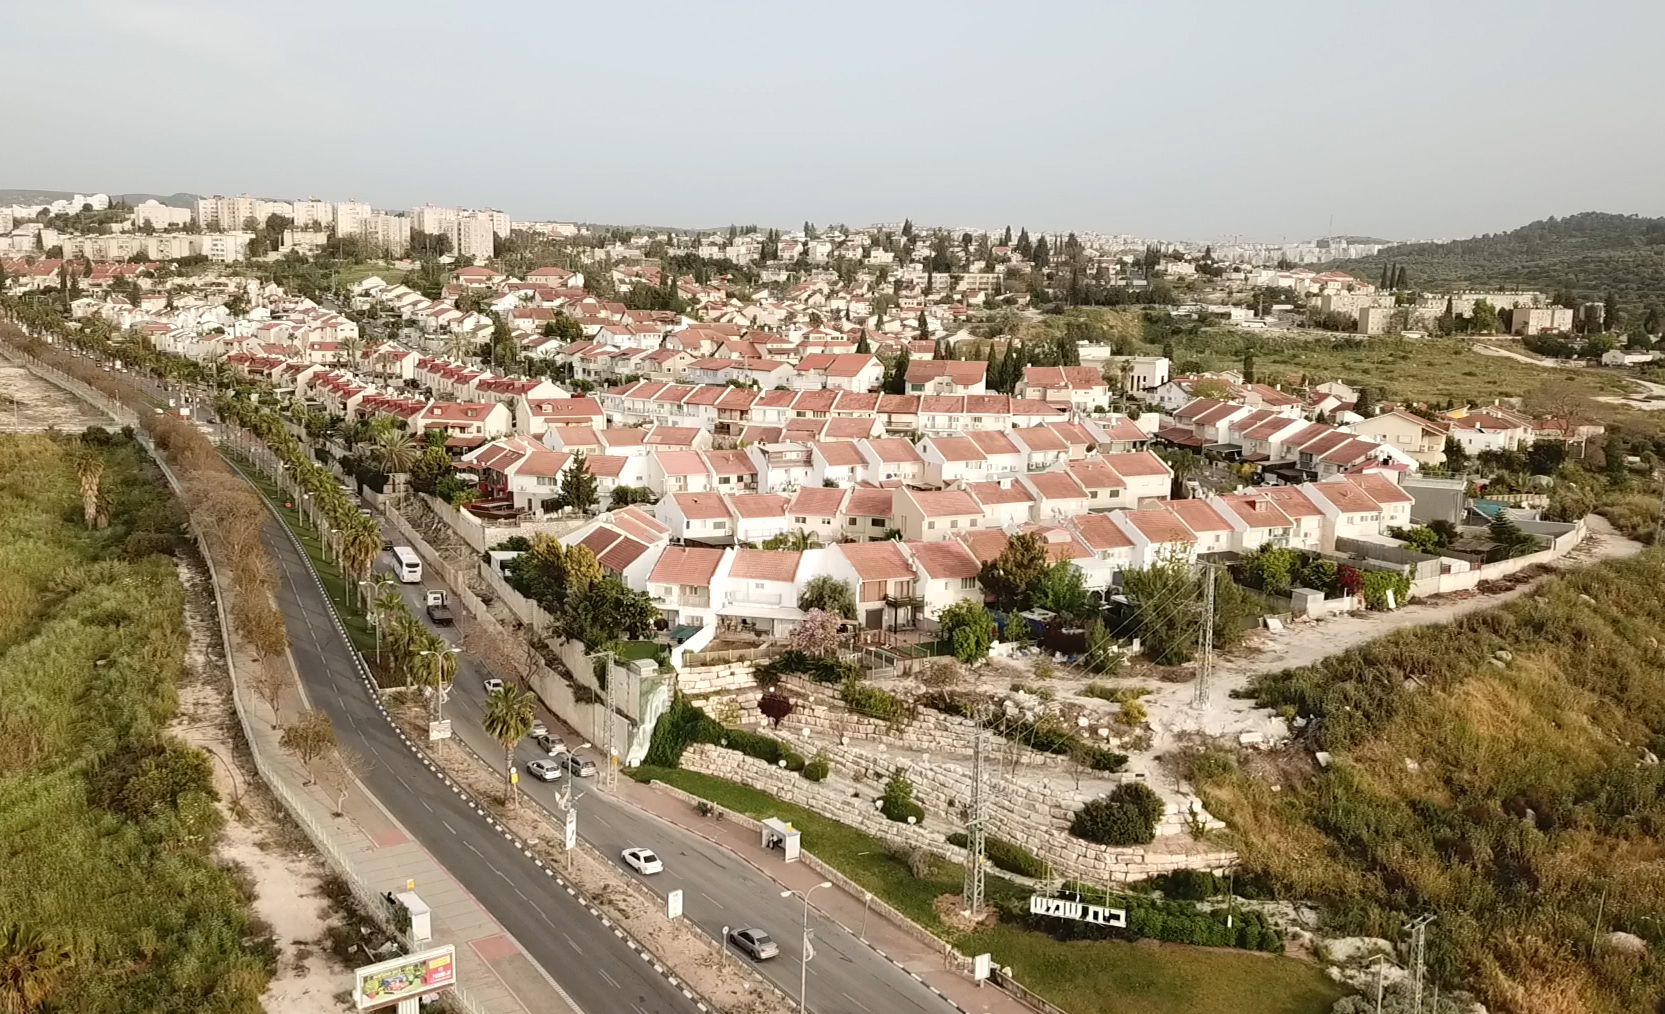 Bet Shemesh Bungalows: Single-Family Living in the Hills